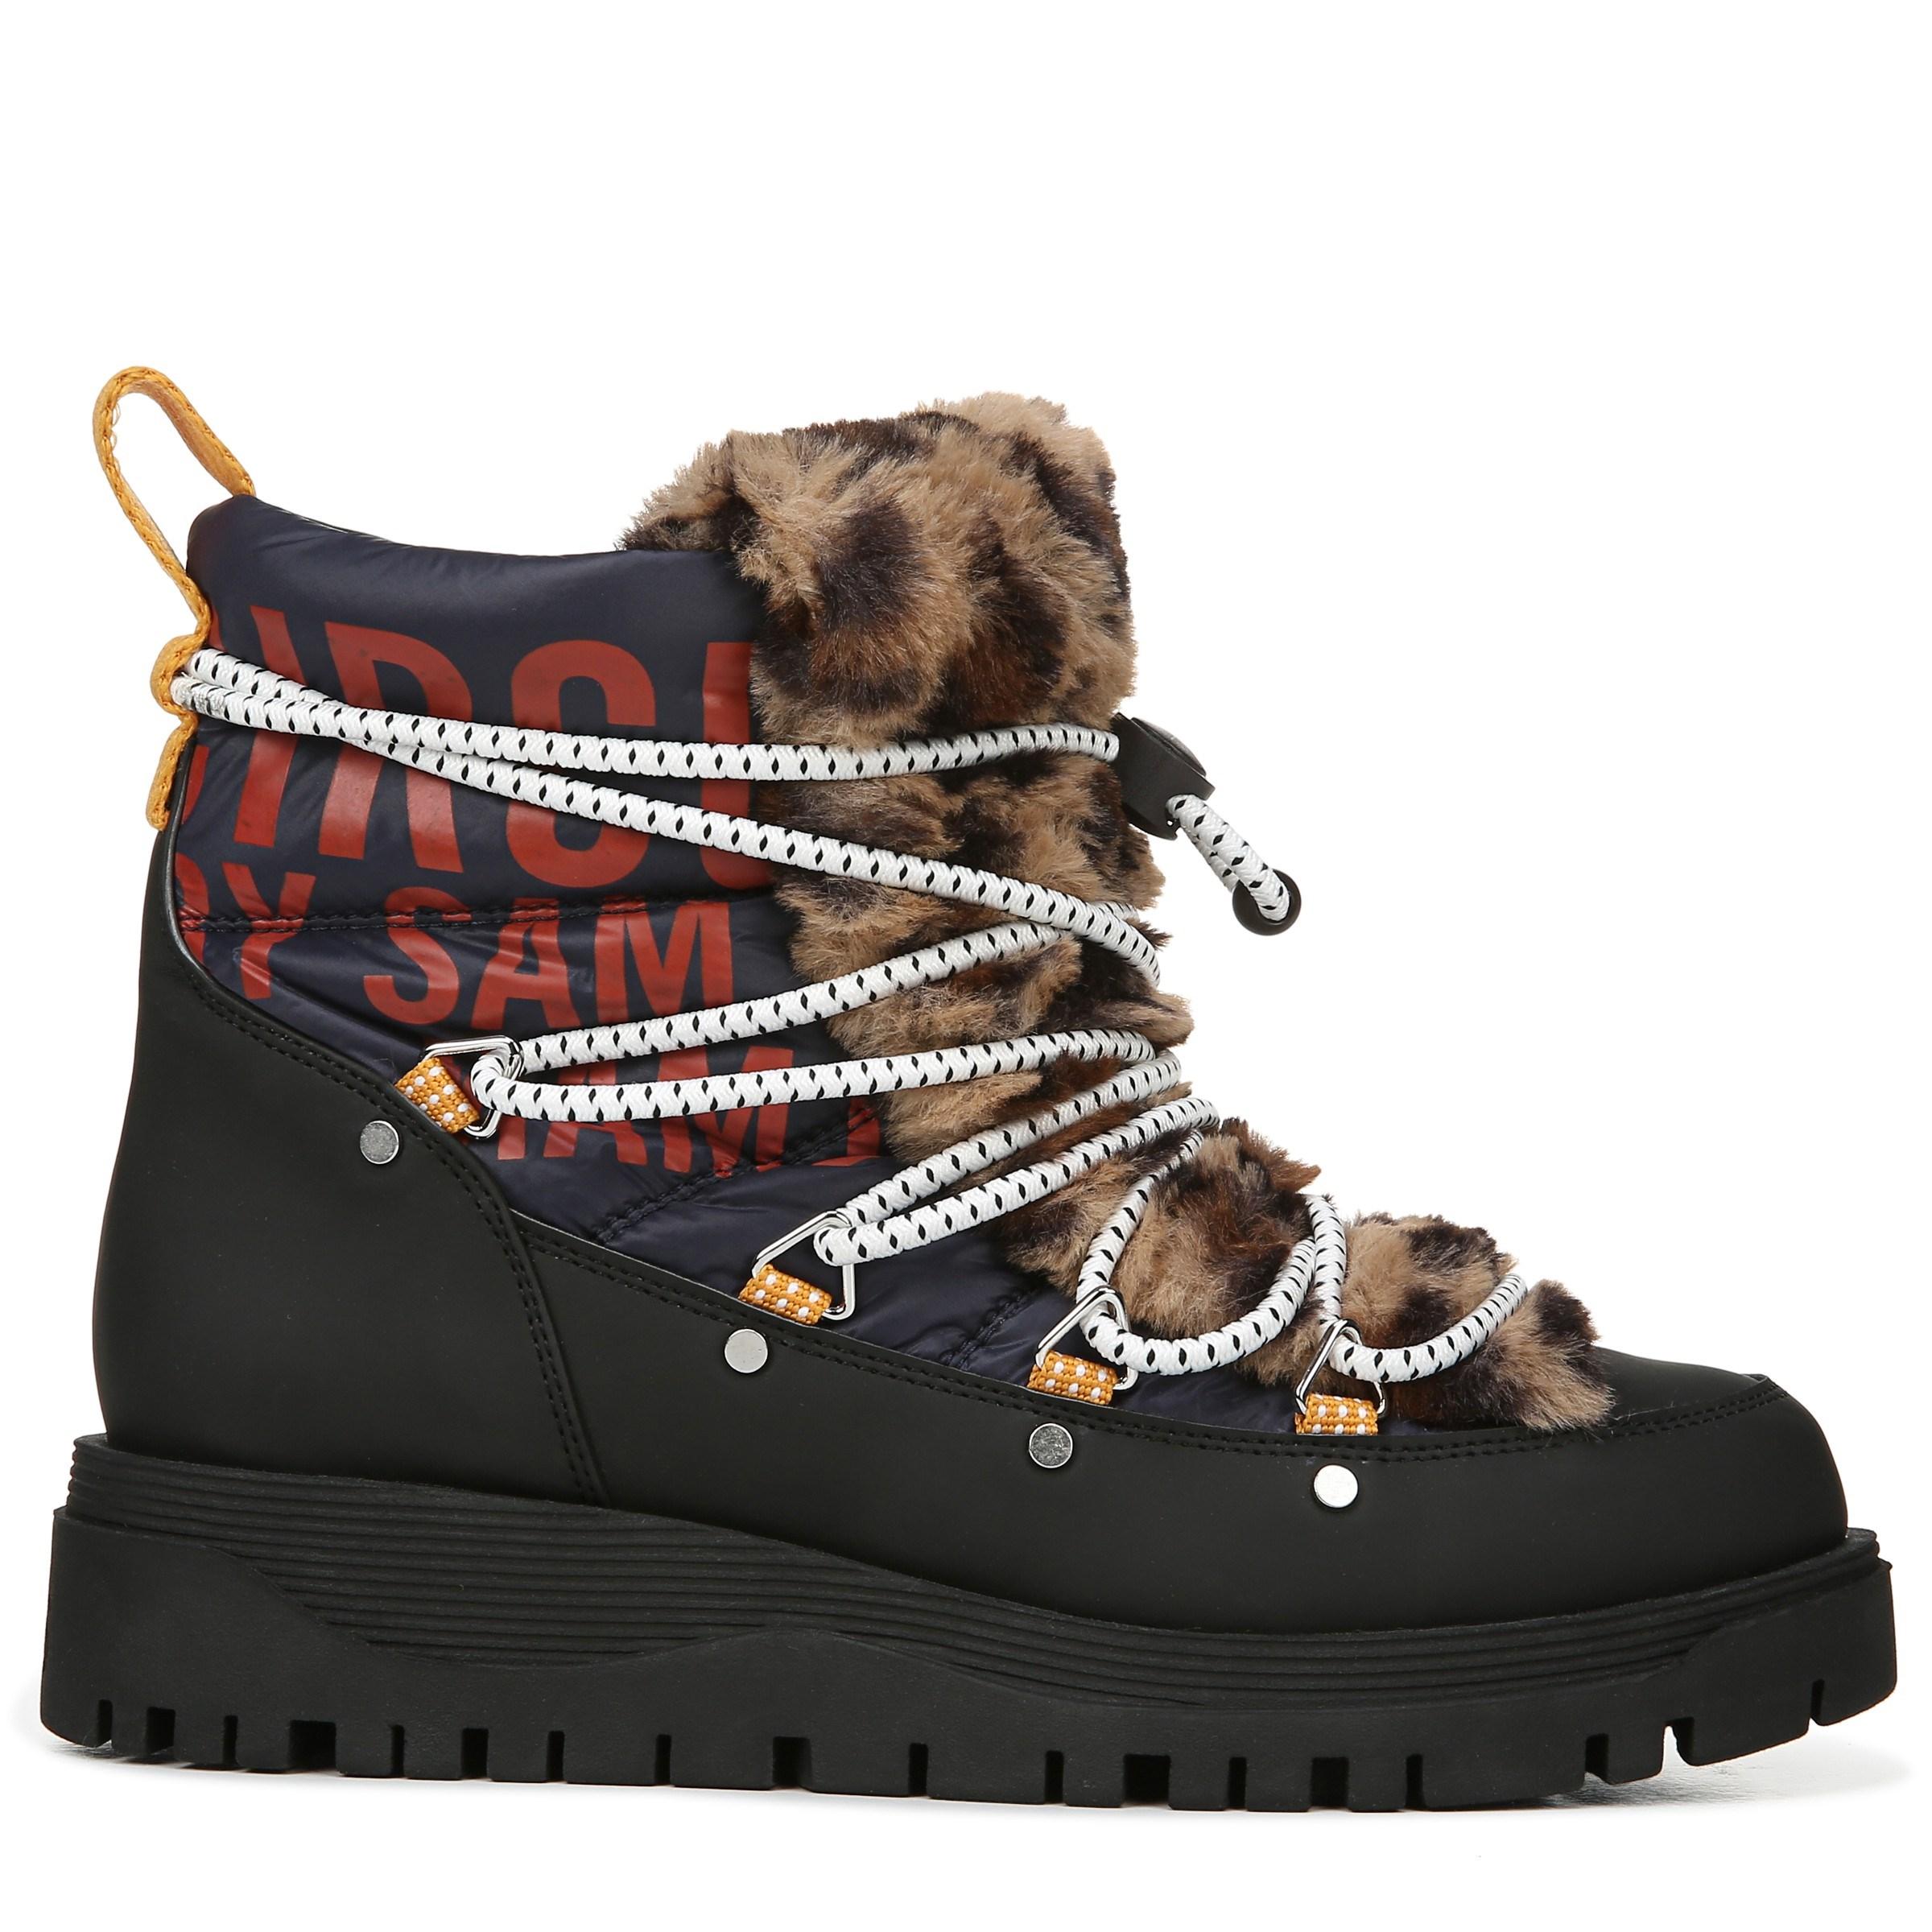 circus by sam edelman leopard booties